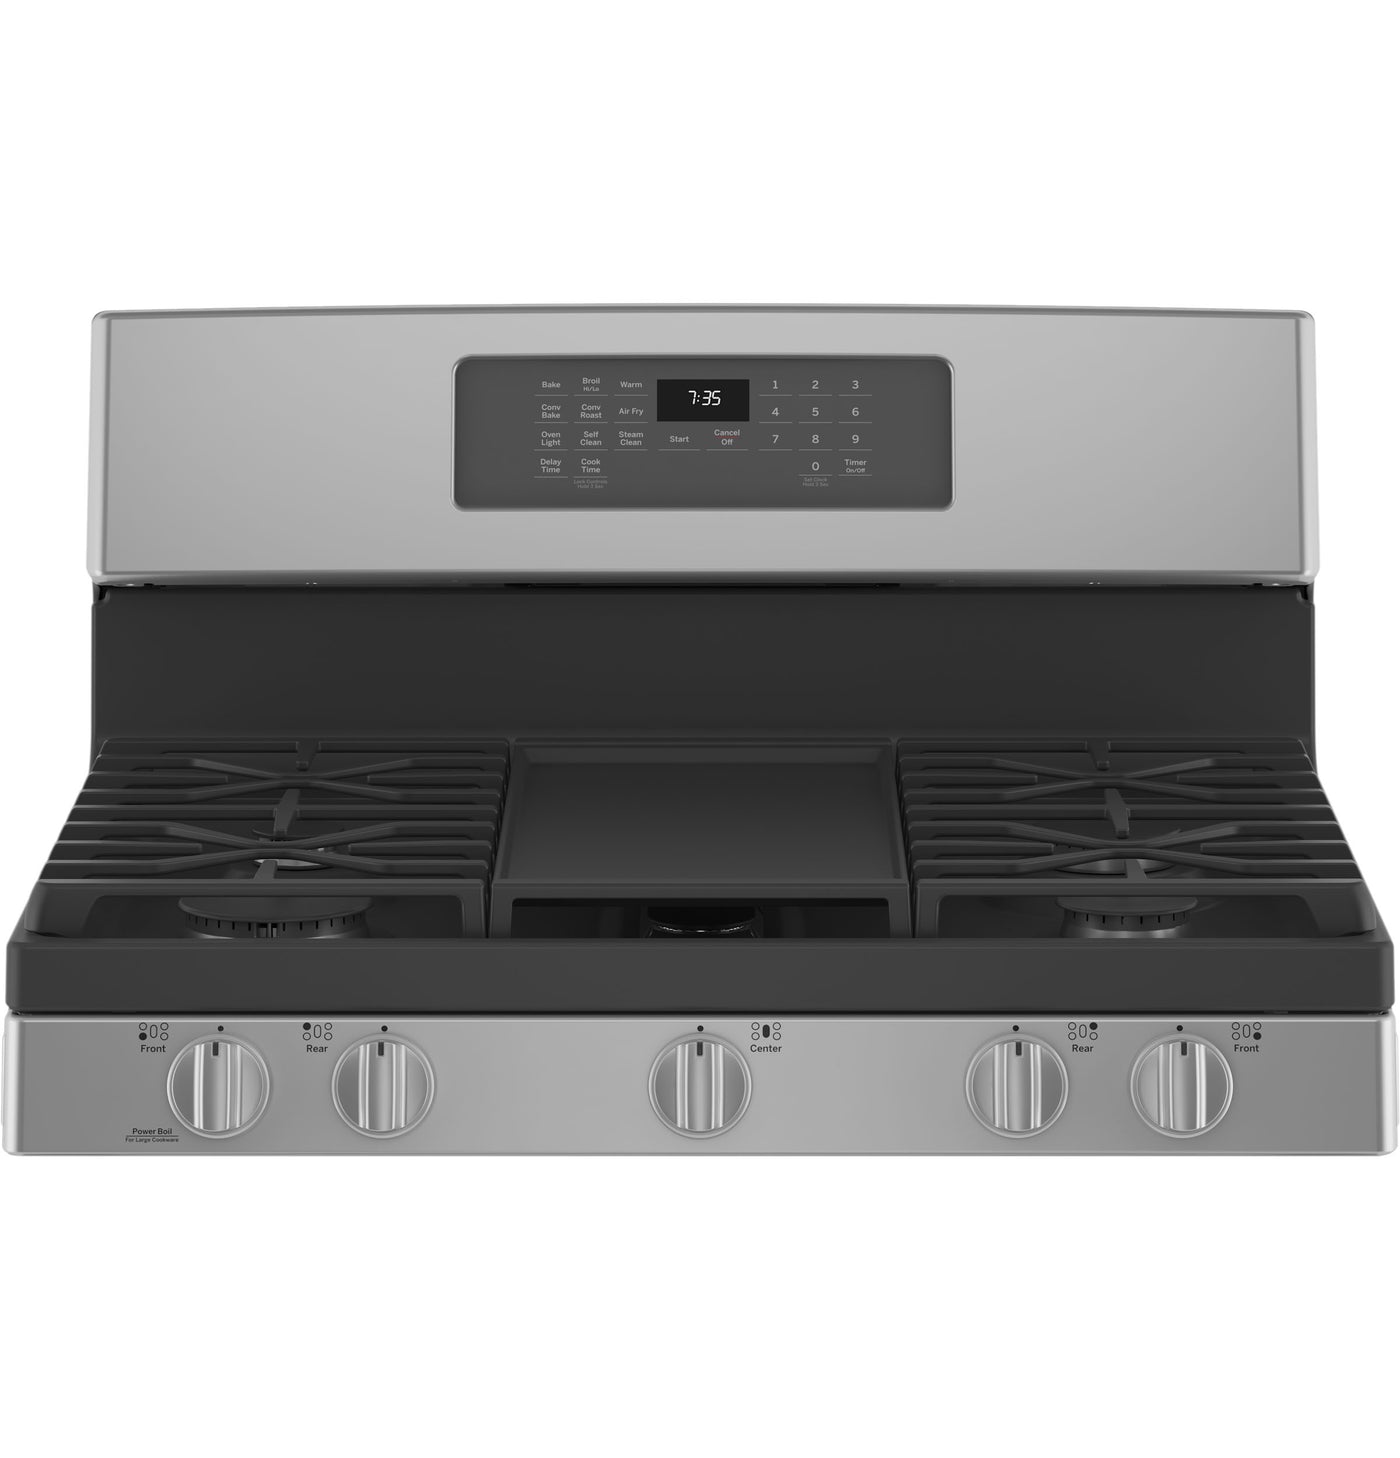 GE Stainless Steel 30" Freestanding Gas Convection Range with Air Fry (5.0 Cu.Ft.) - JCGB735SPSS